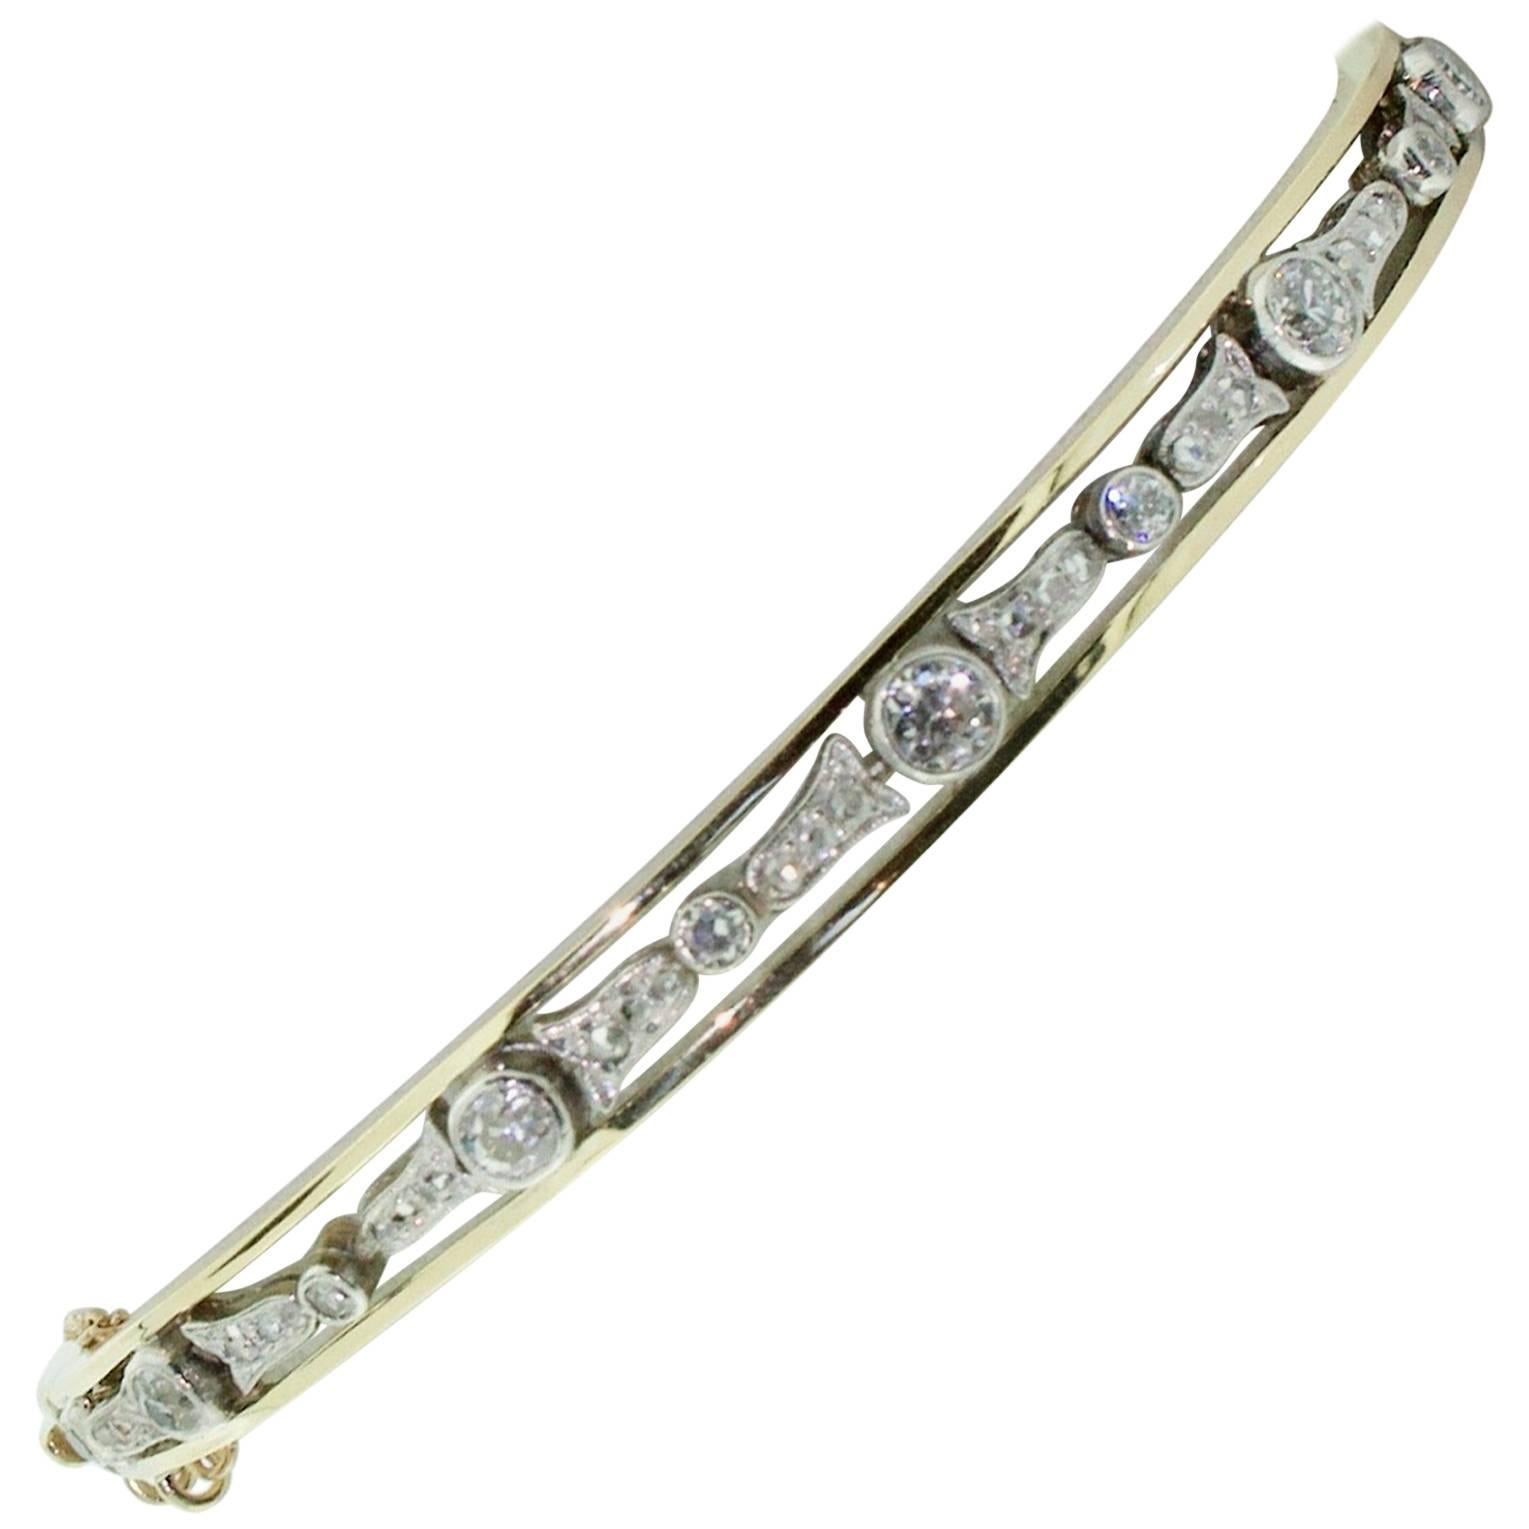 1930s Bangle Bracelet in Platinum and Yellow Gold